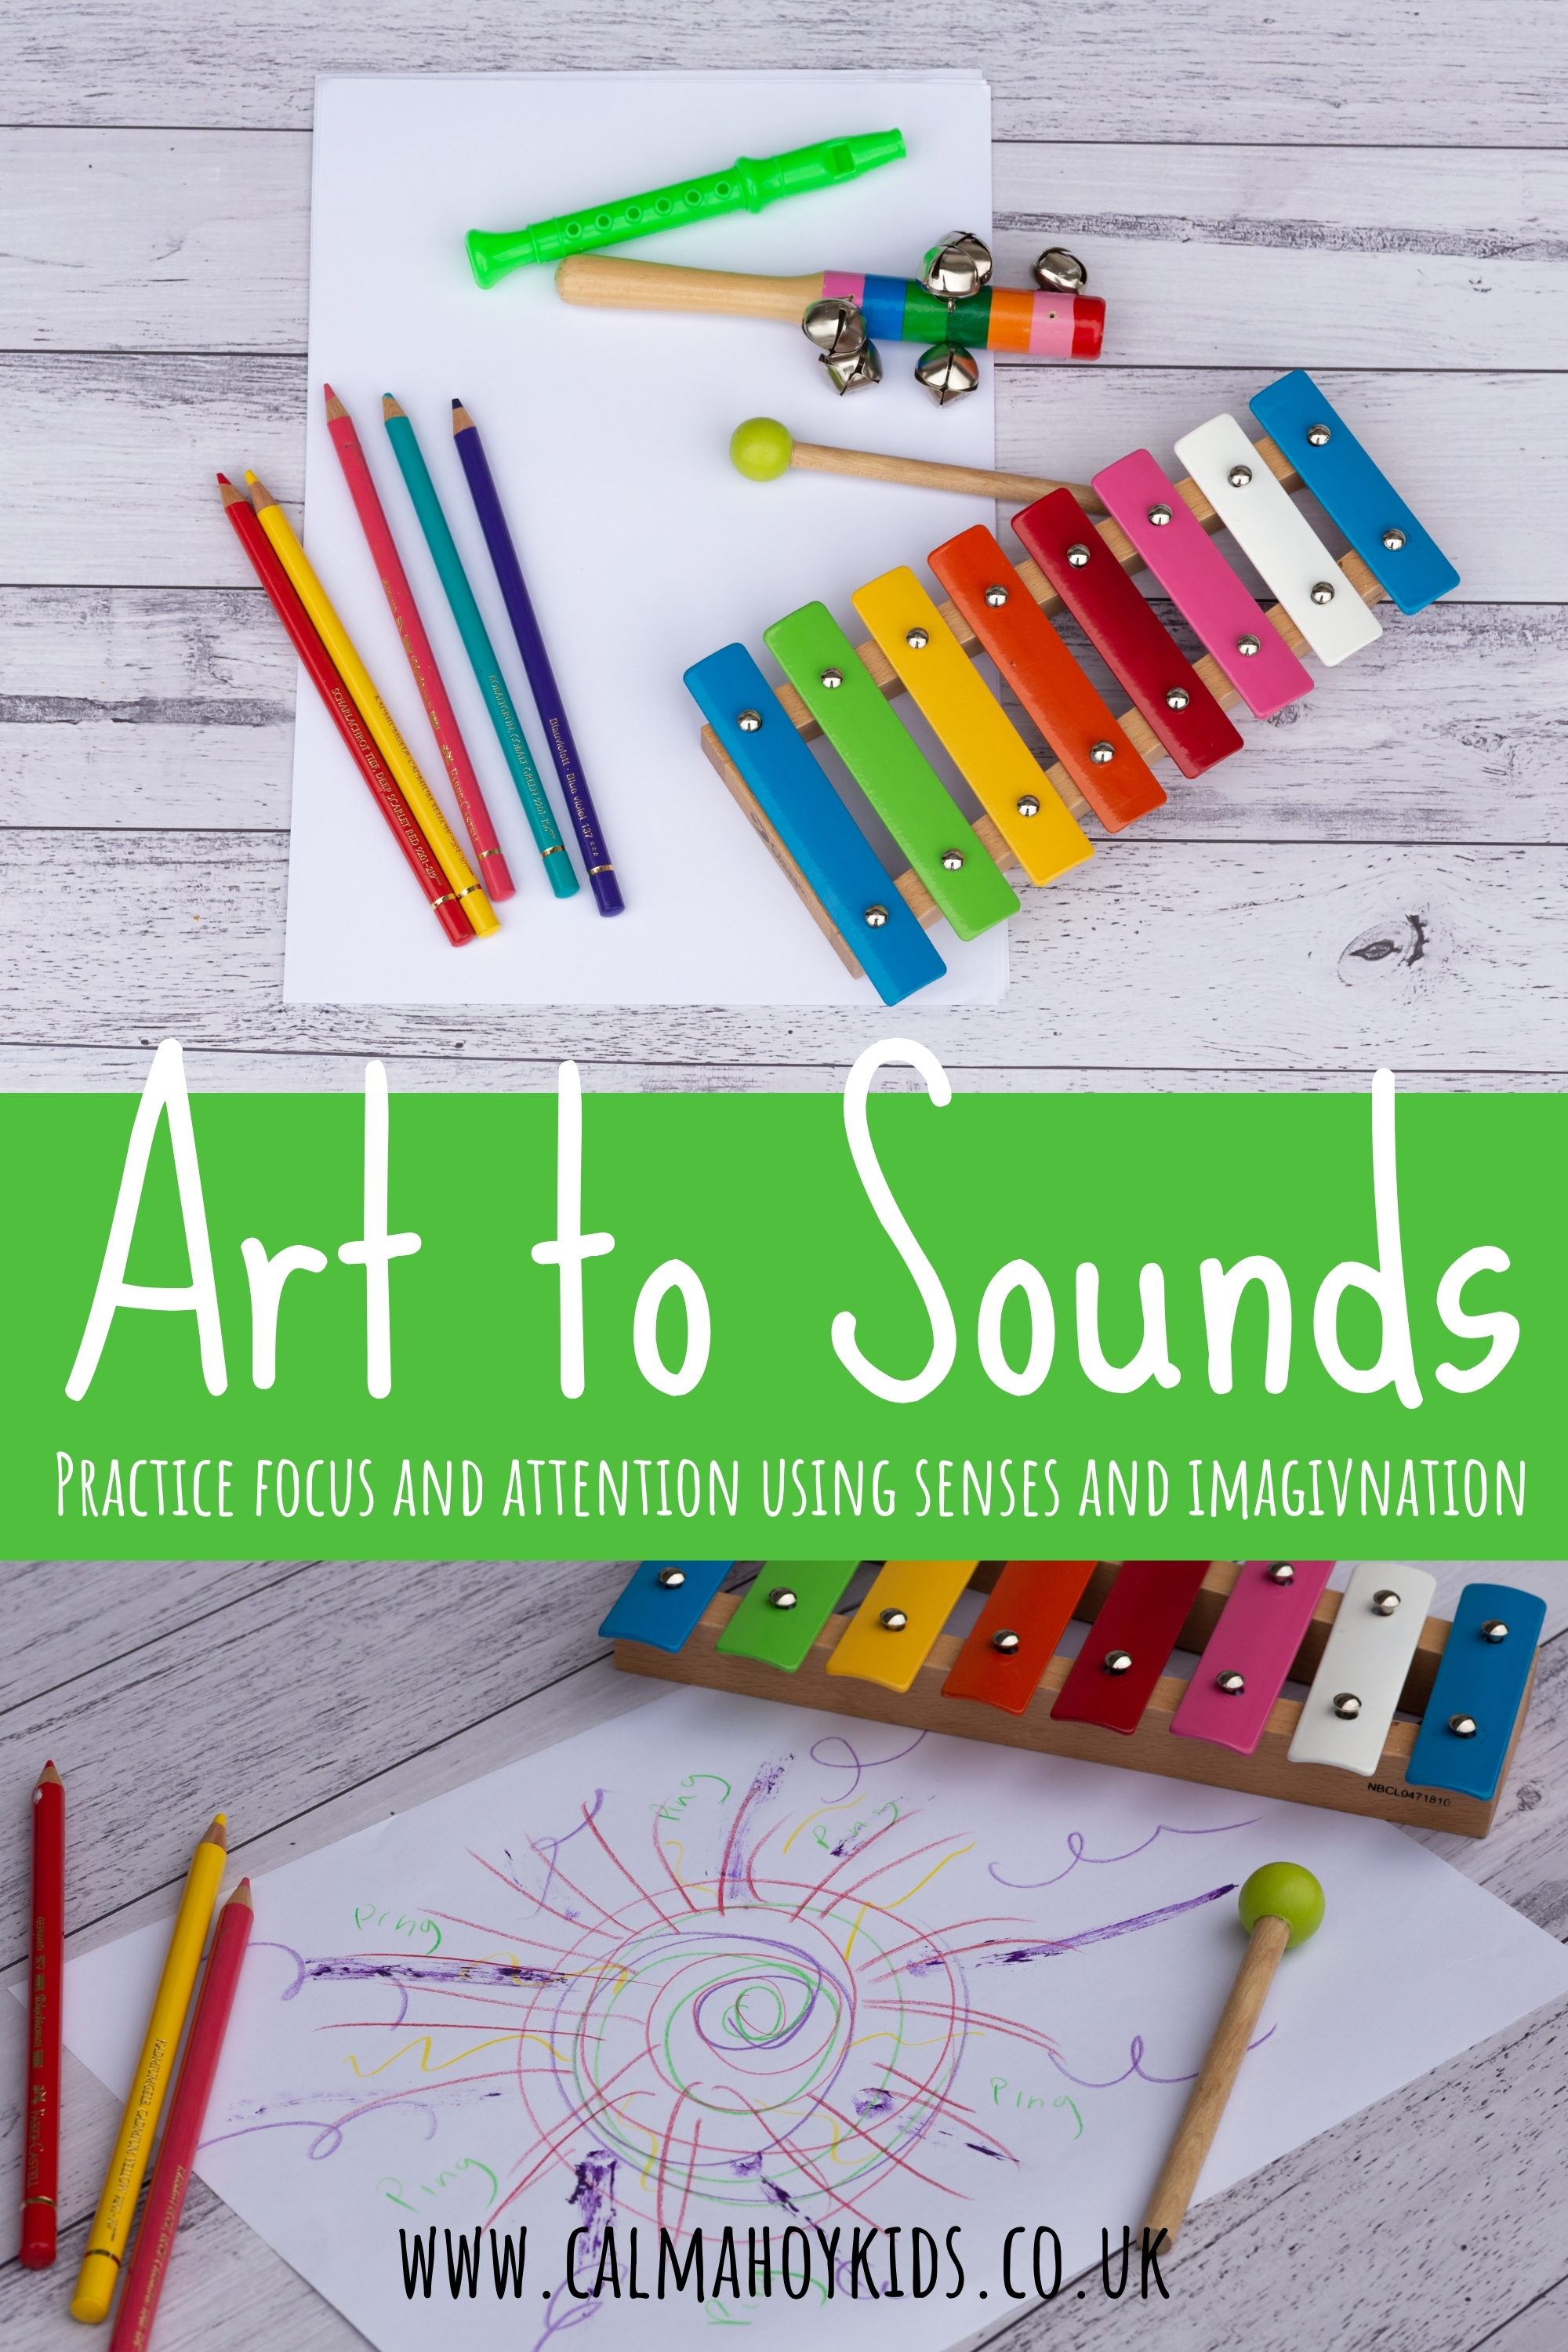 A Mindful Art Activity for Kids •  How to Make Art to Sound